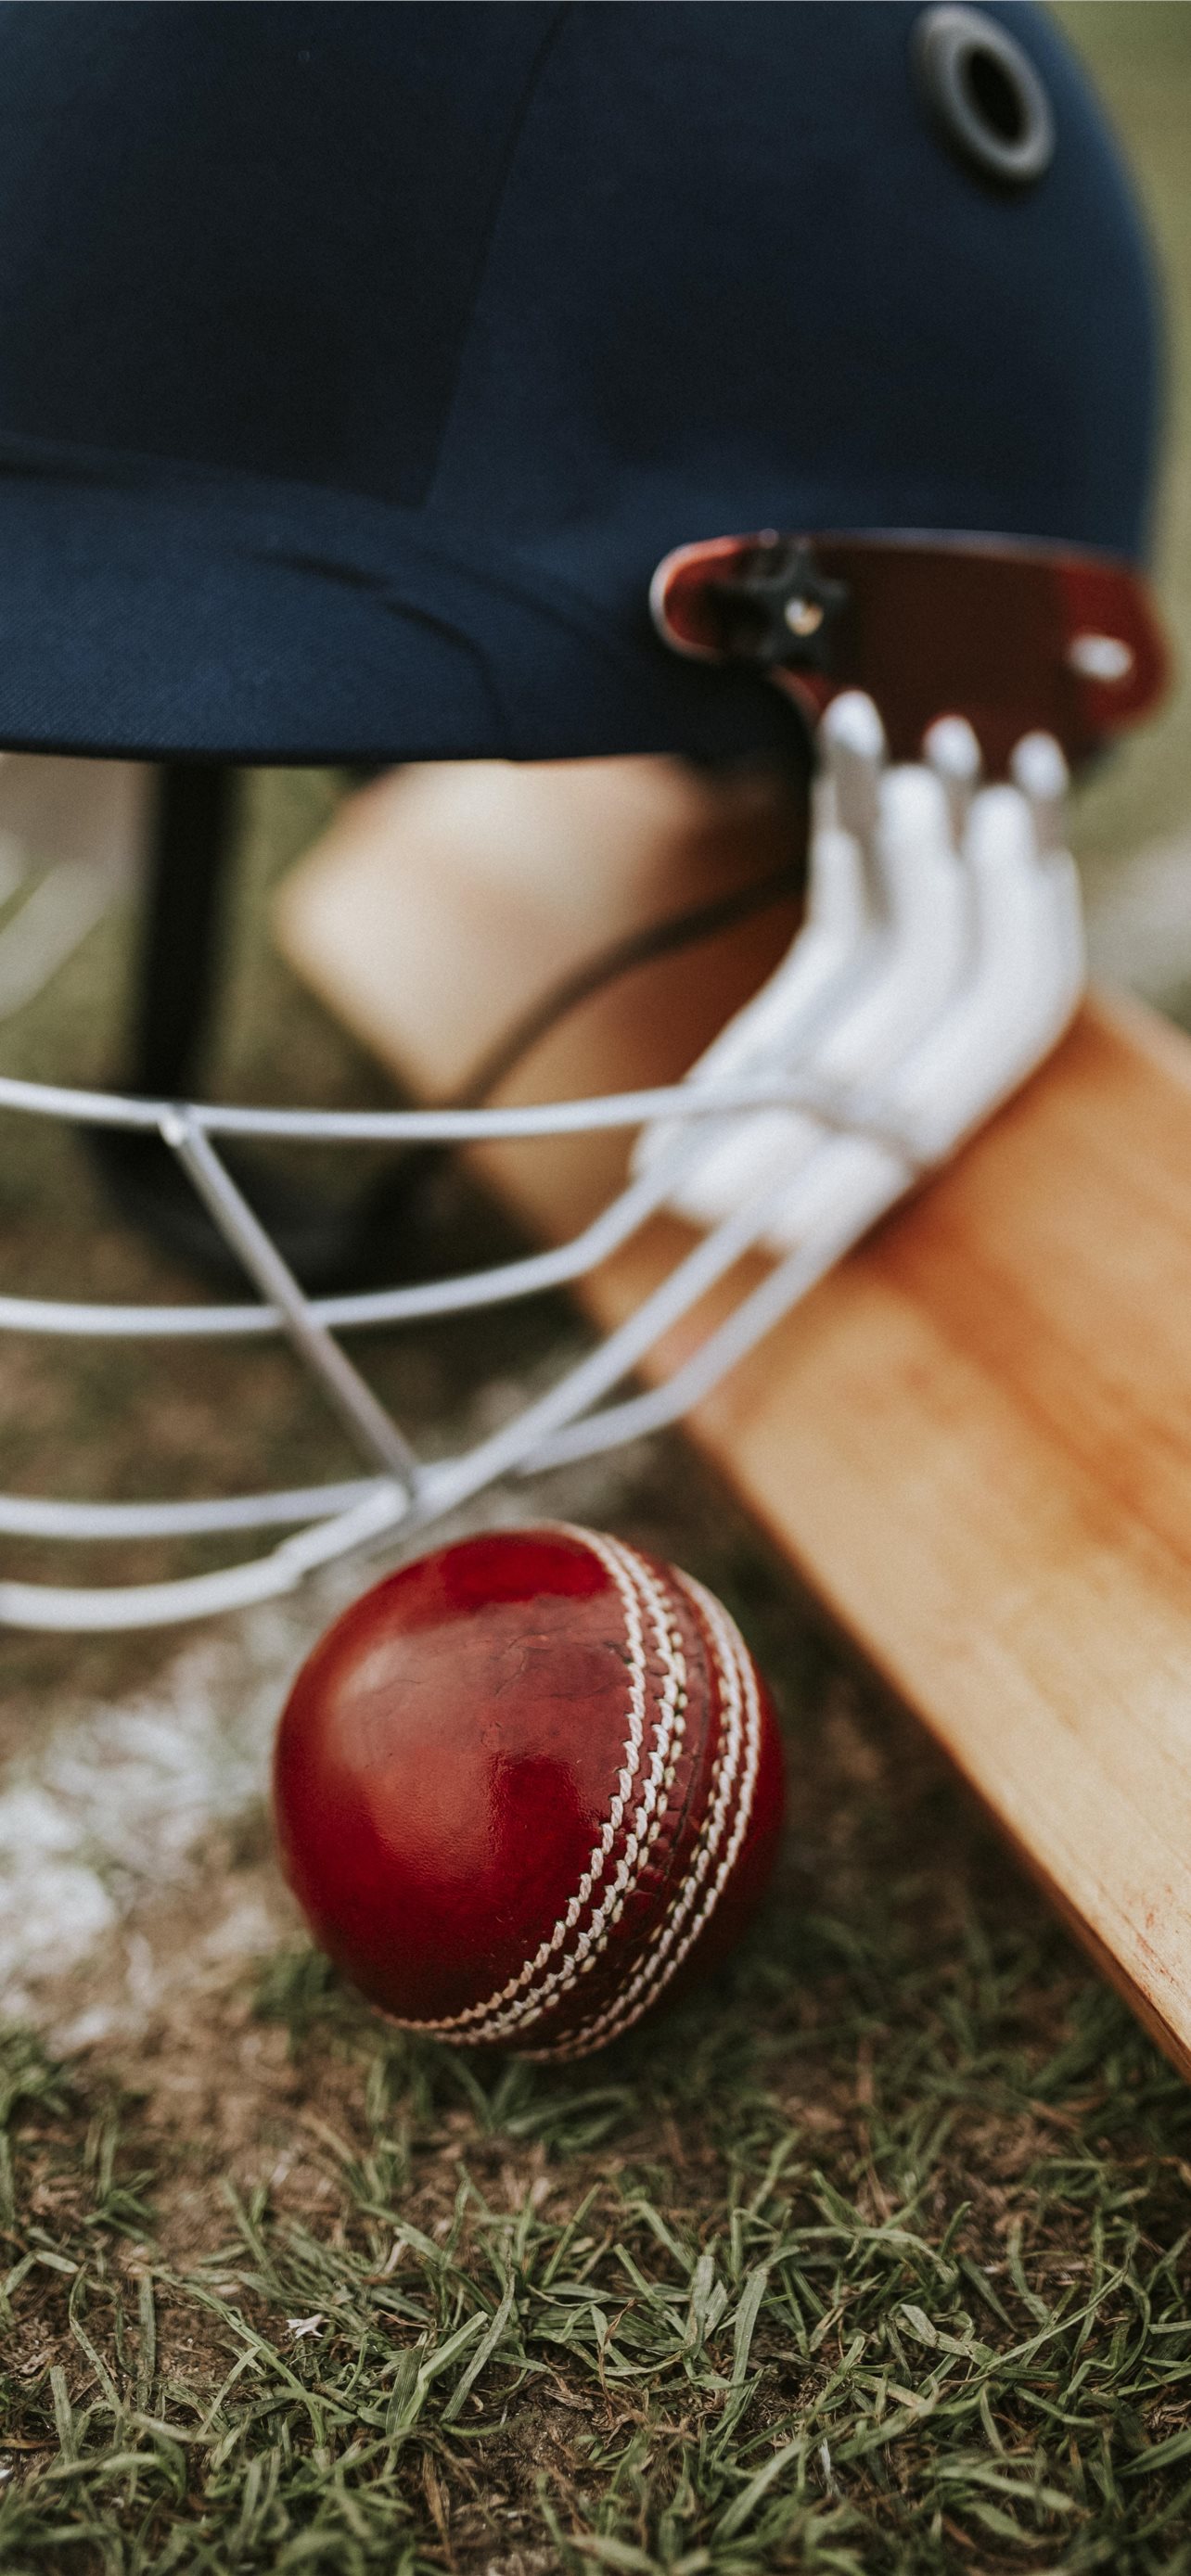 Cricket Photos, Download The BEST Free Cricket Stock Photos & HD Images